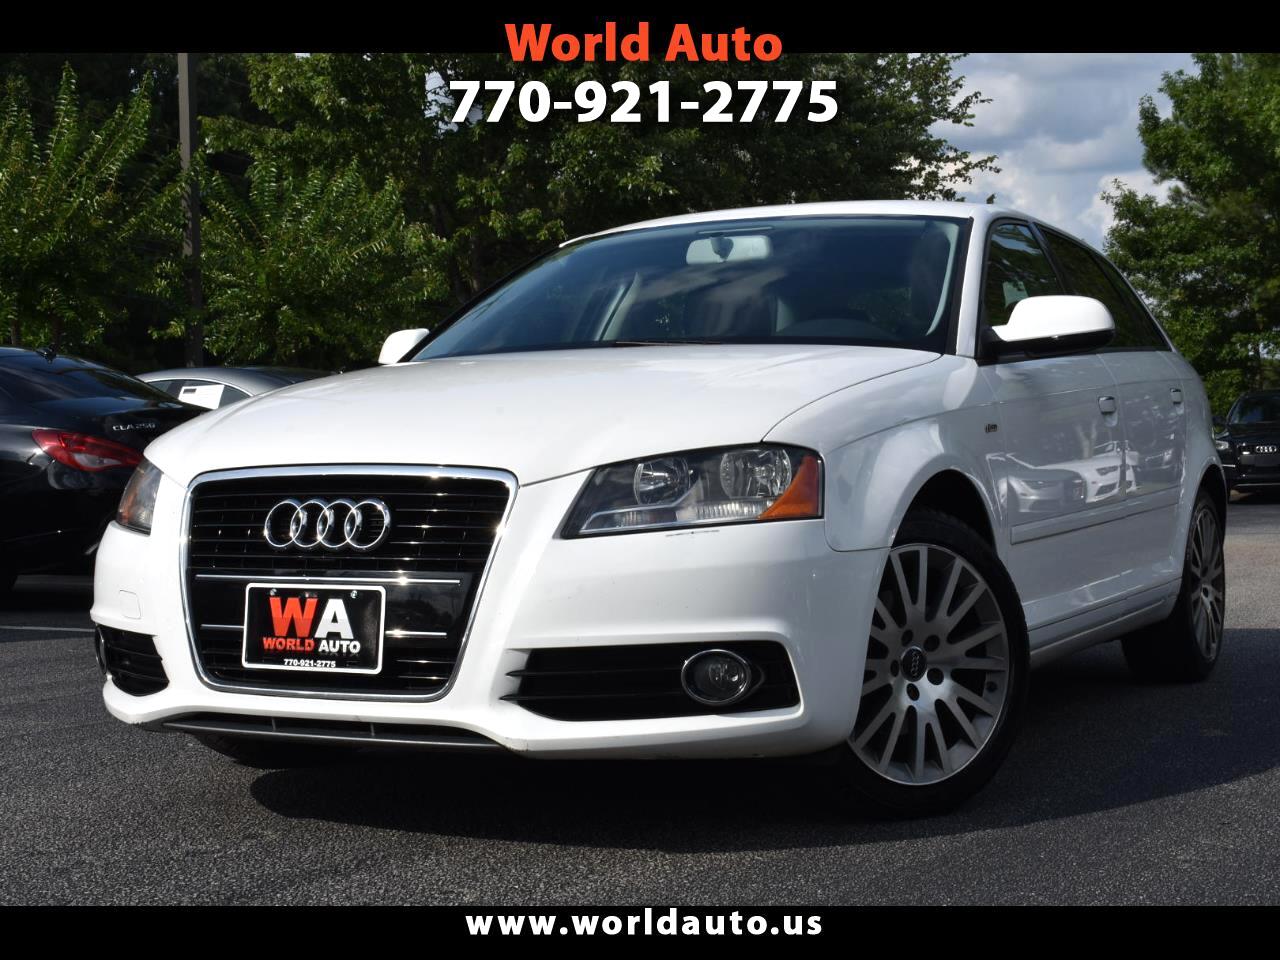 Audi A3 2.0 TDI Clean Diesel with S tronic 2013